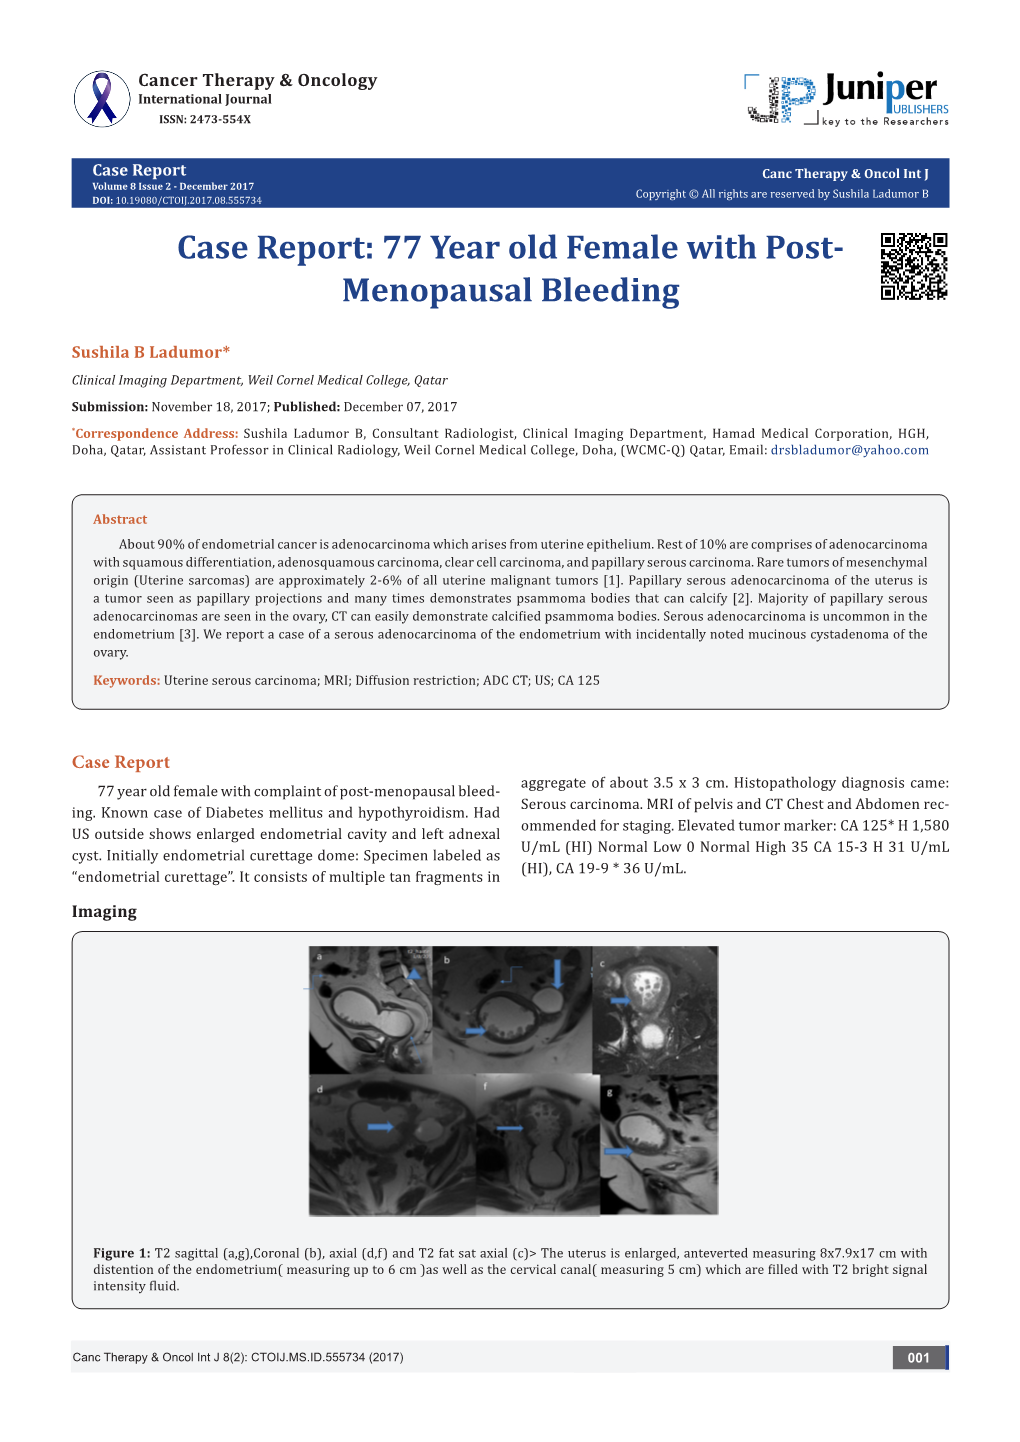 Case Report: 77 Year Old Female with Post-Menopausal Bleeding